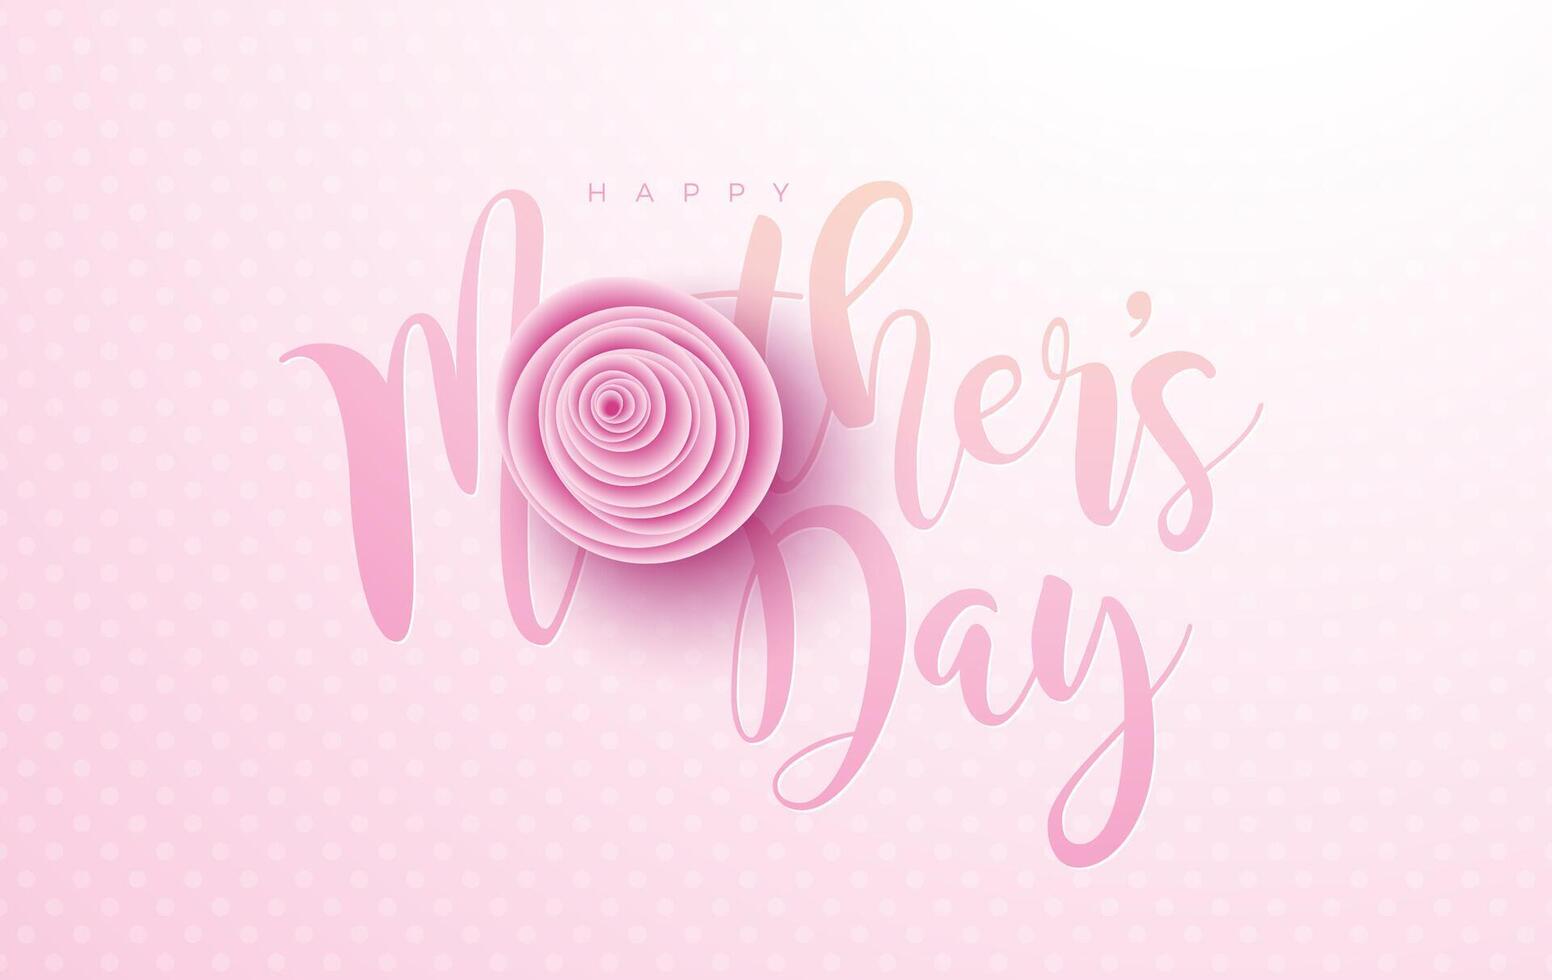 Happy Mother's Day Banner or Postcard with Paper Hearts and Rose Flower on Pink Background. Vector Mom Celebration Design with Symbol of Love for Greeting Card, Flyer, Invitation, Brochure, Poster.